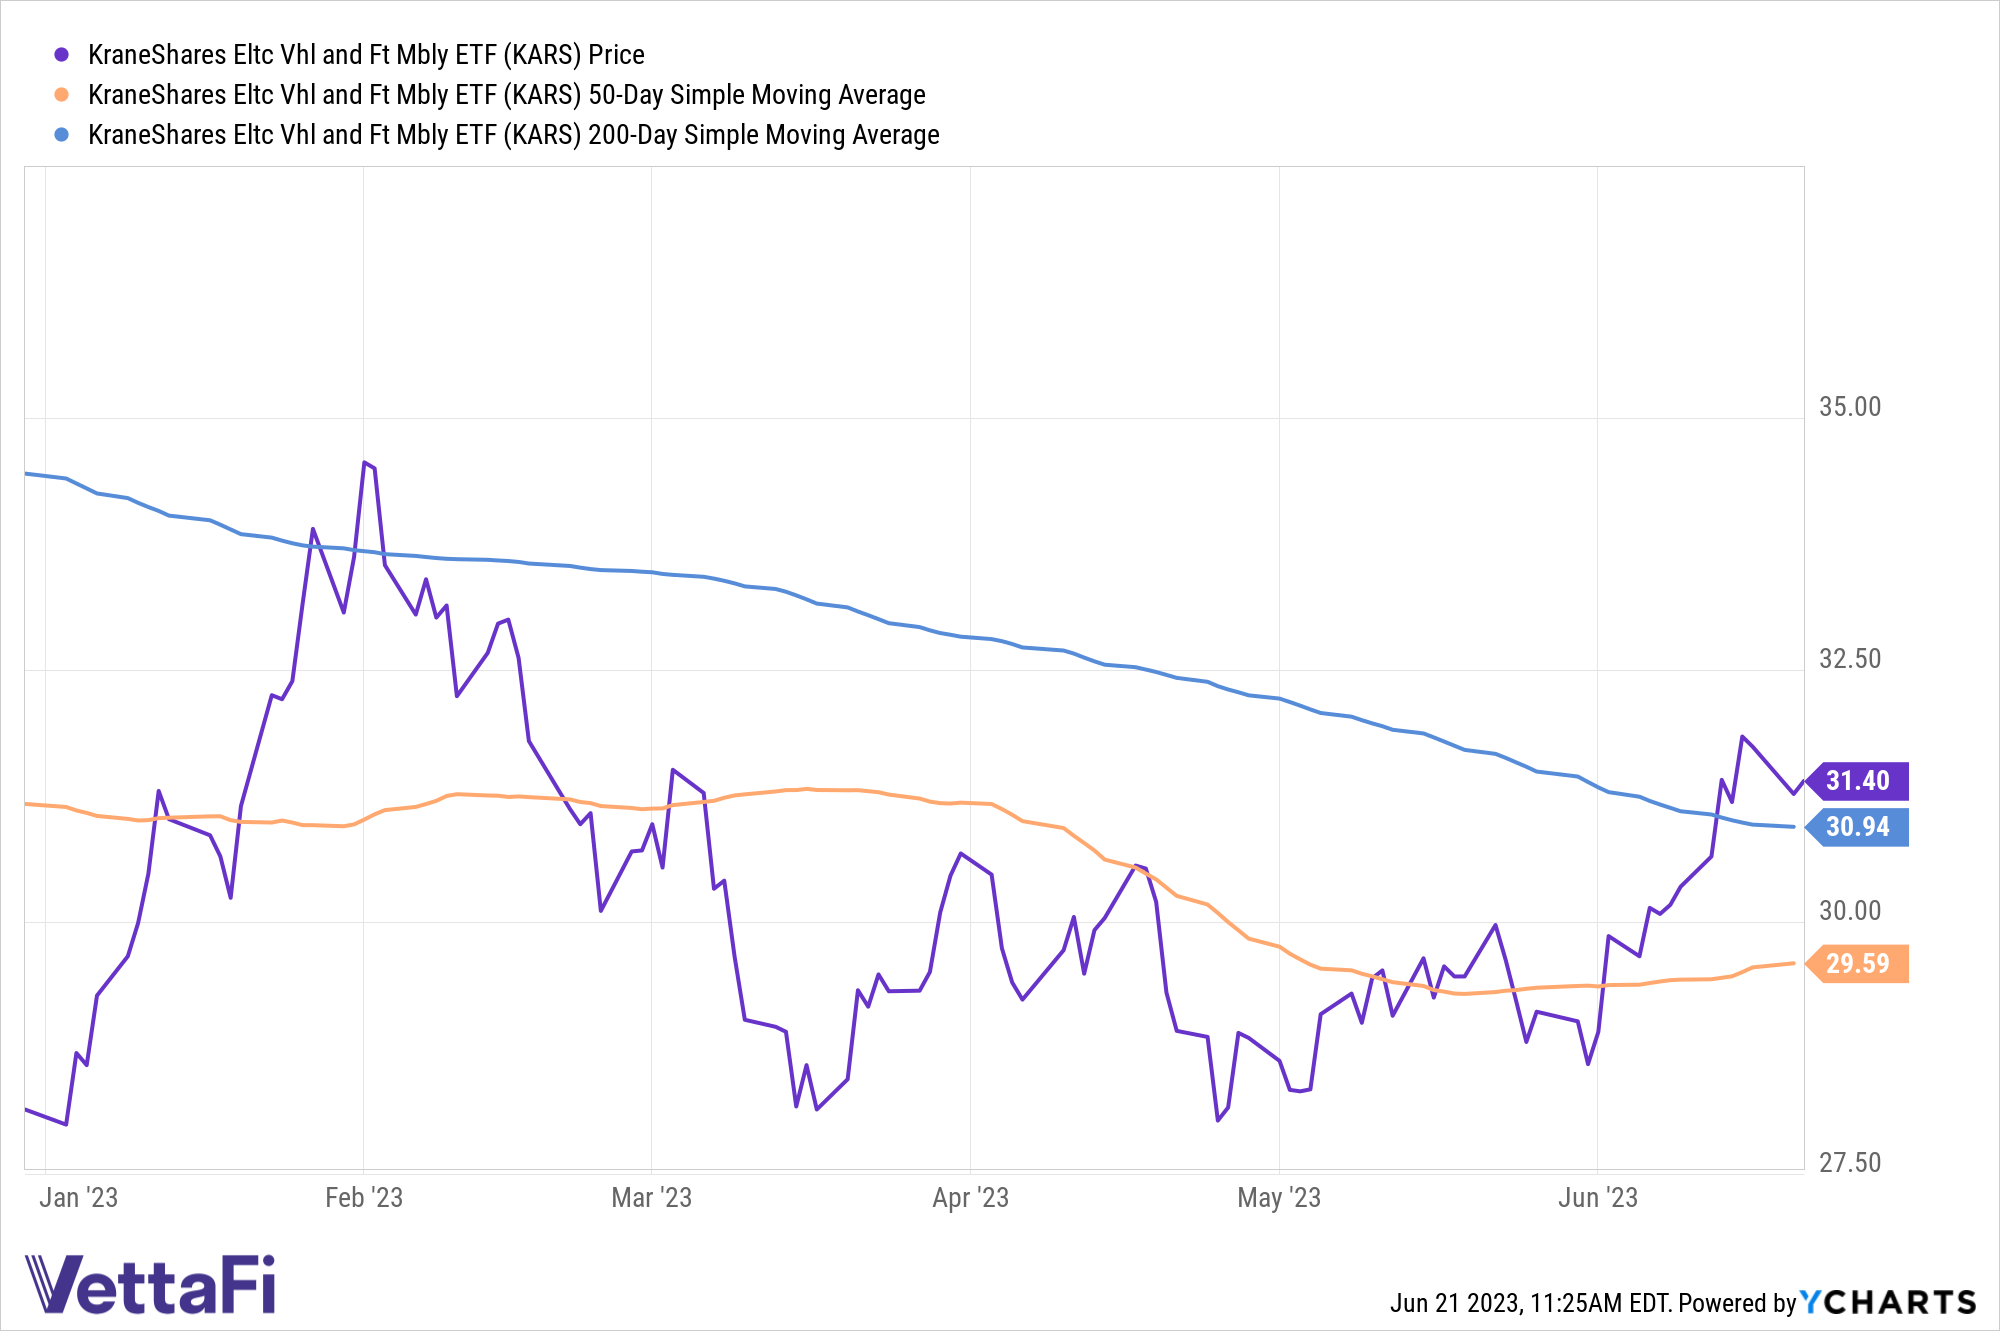 Price chart of KARS (31.40) compared to 50-day SMA (29.59) and 200-day SMA (30.94). 